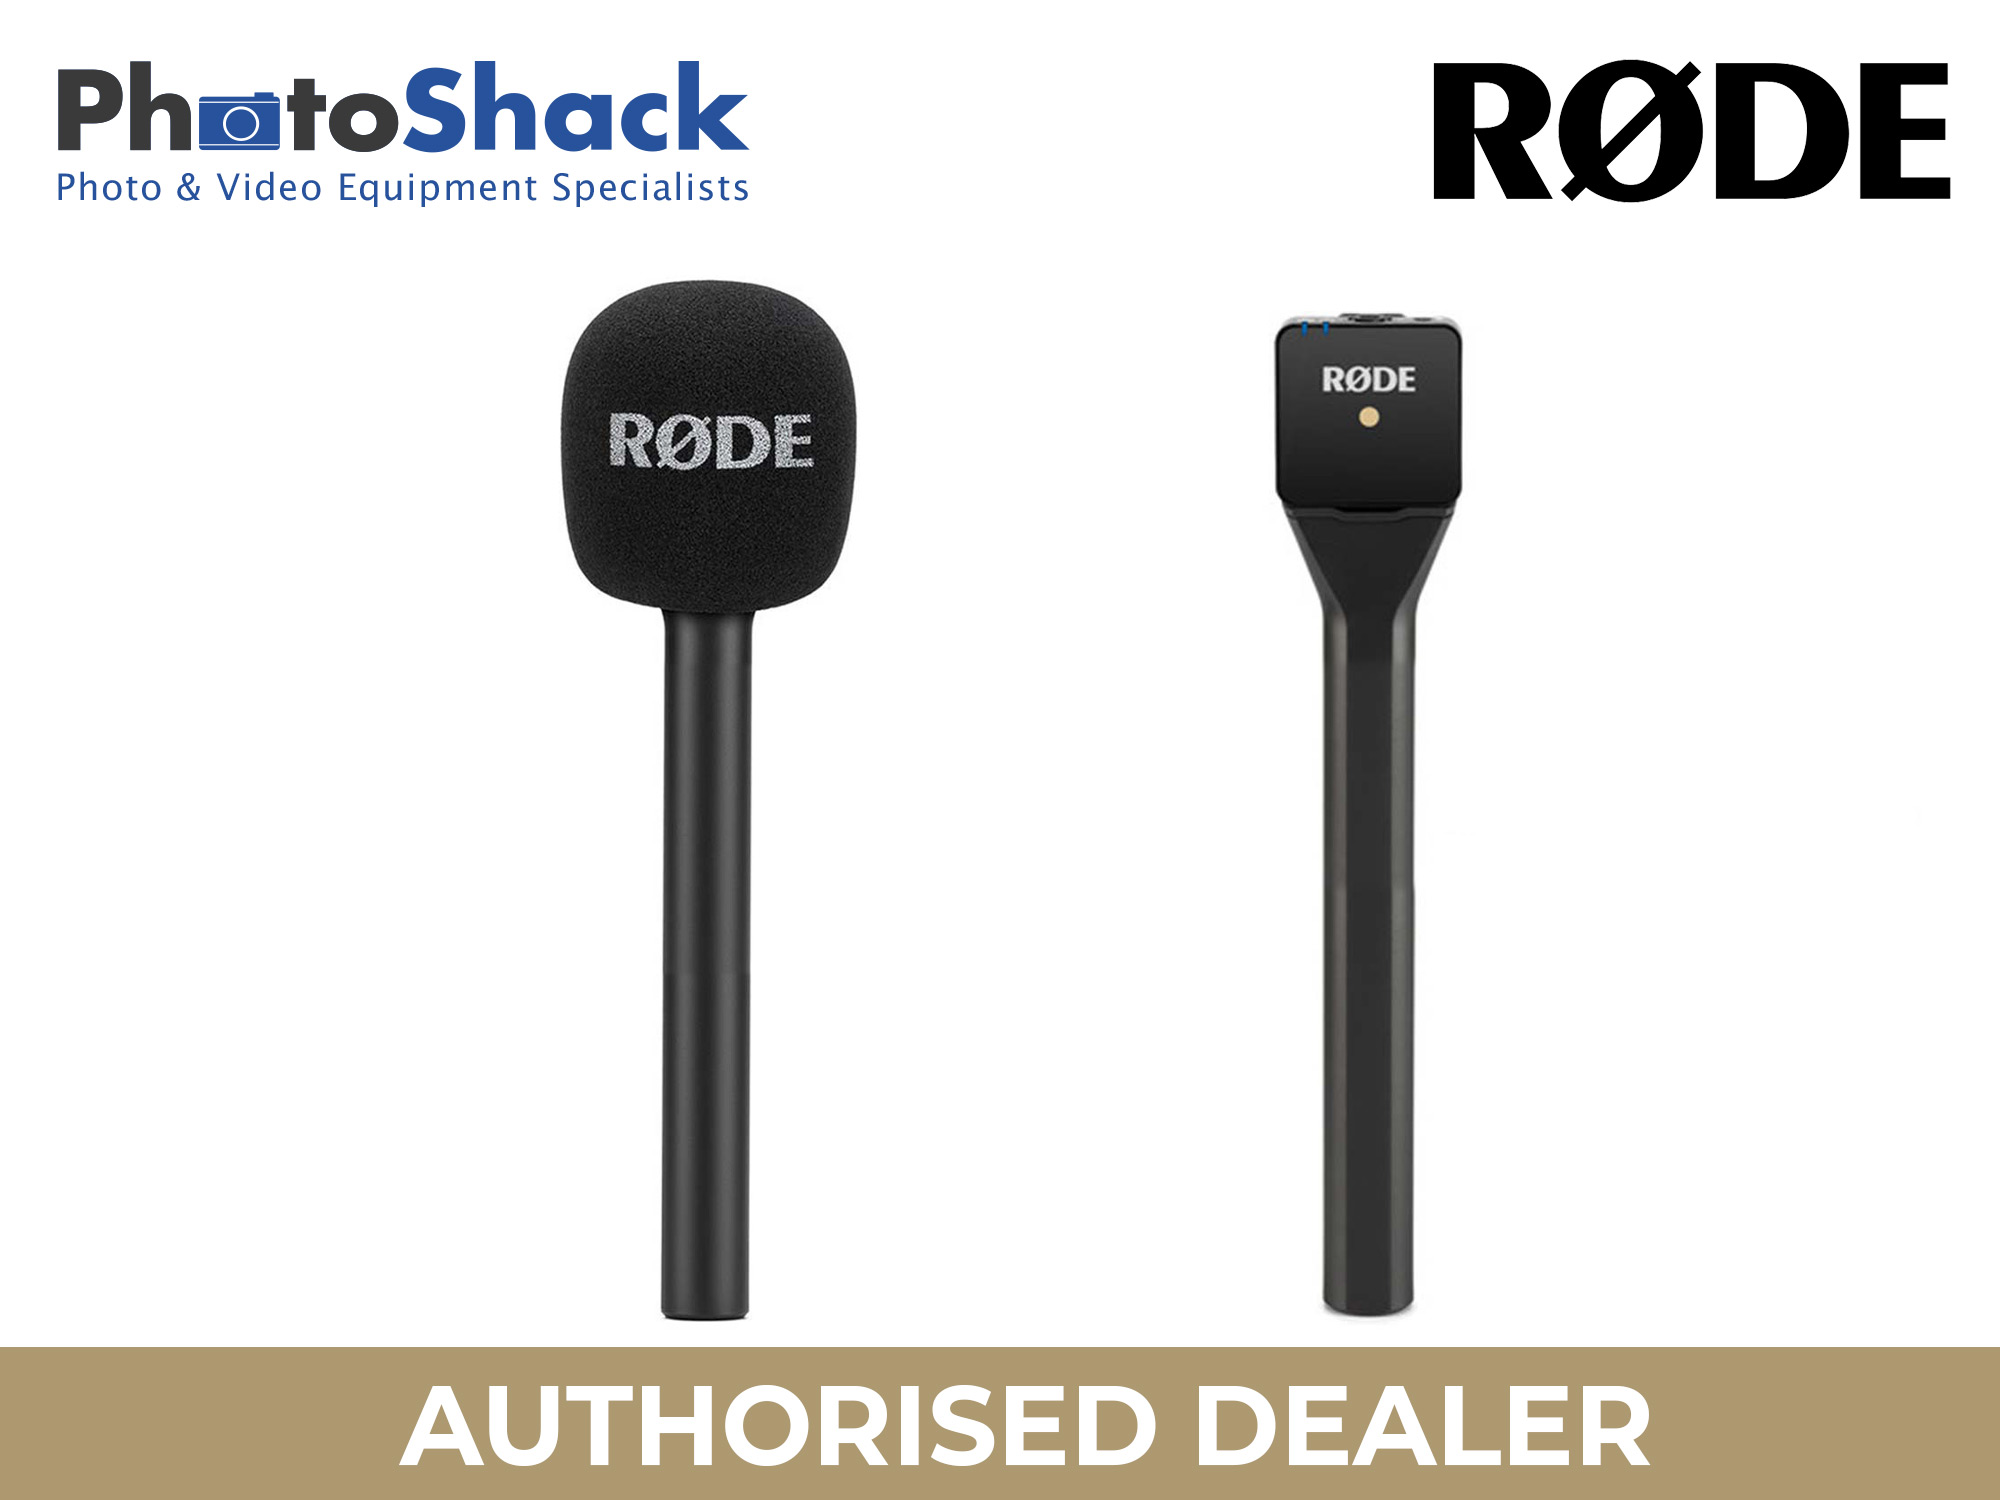 Rode Interview GO Handheld Microphone Adapter for Rode Wireless GO